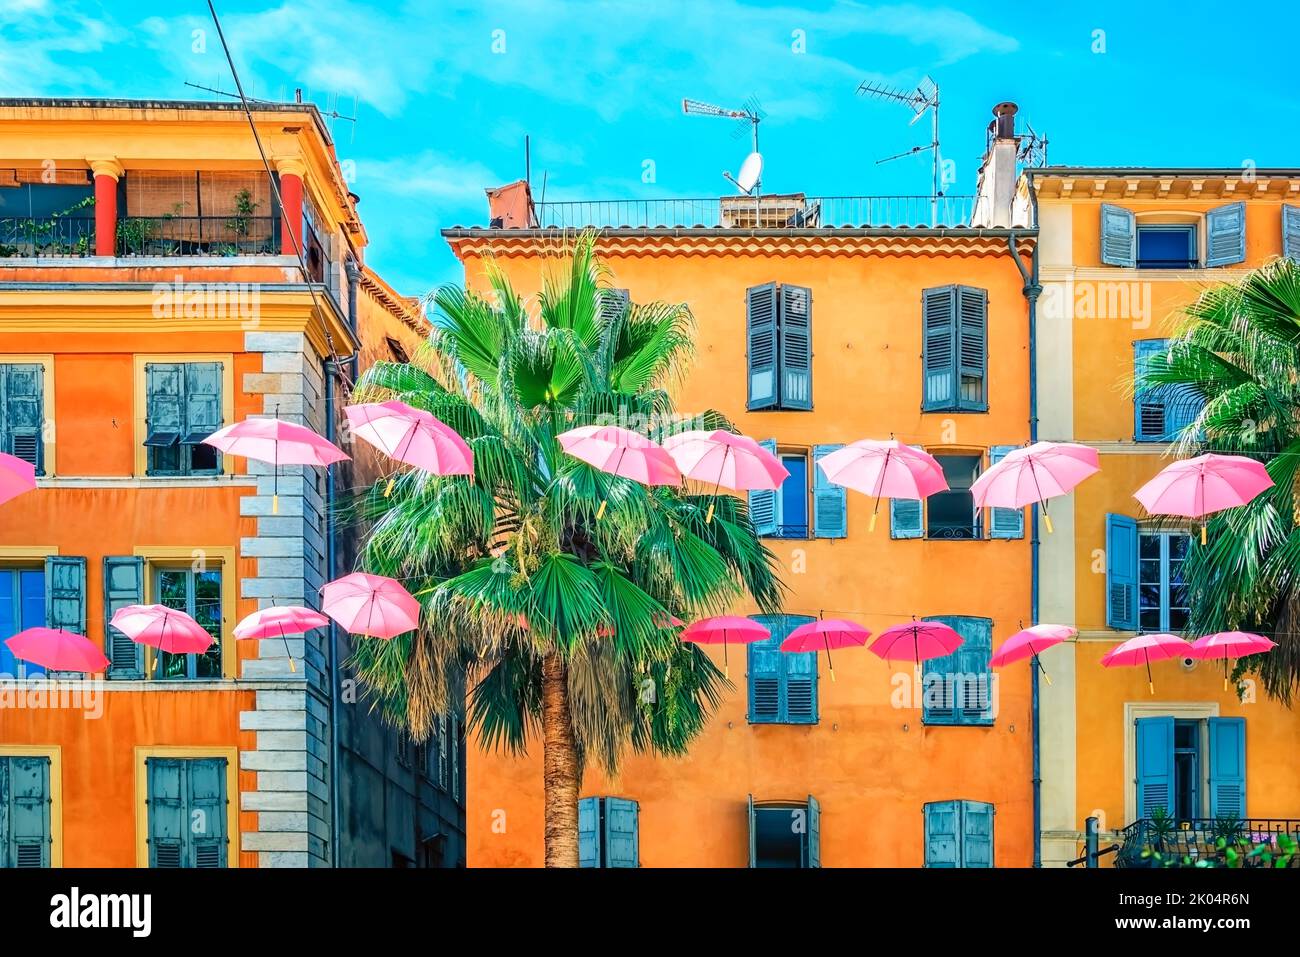 The city of Grasse on the French Riviera Stock Photo